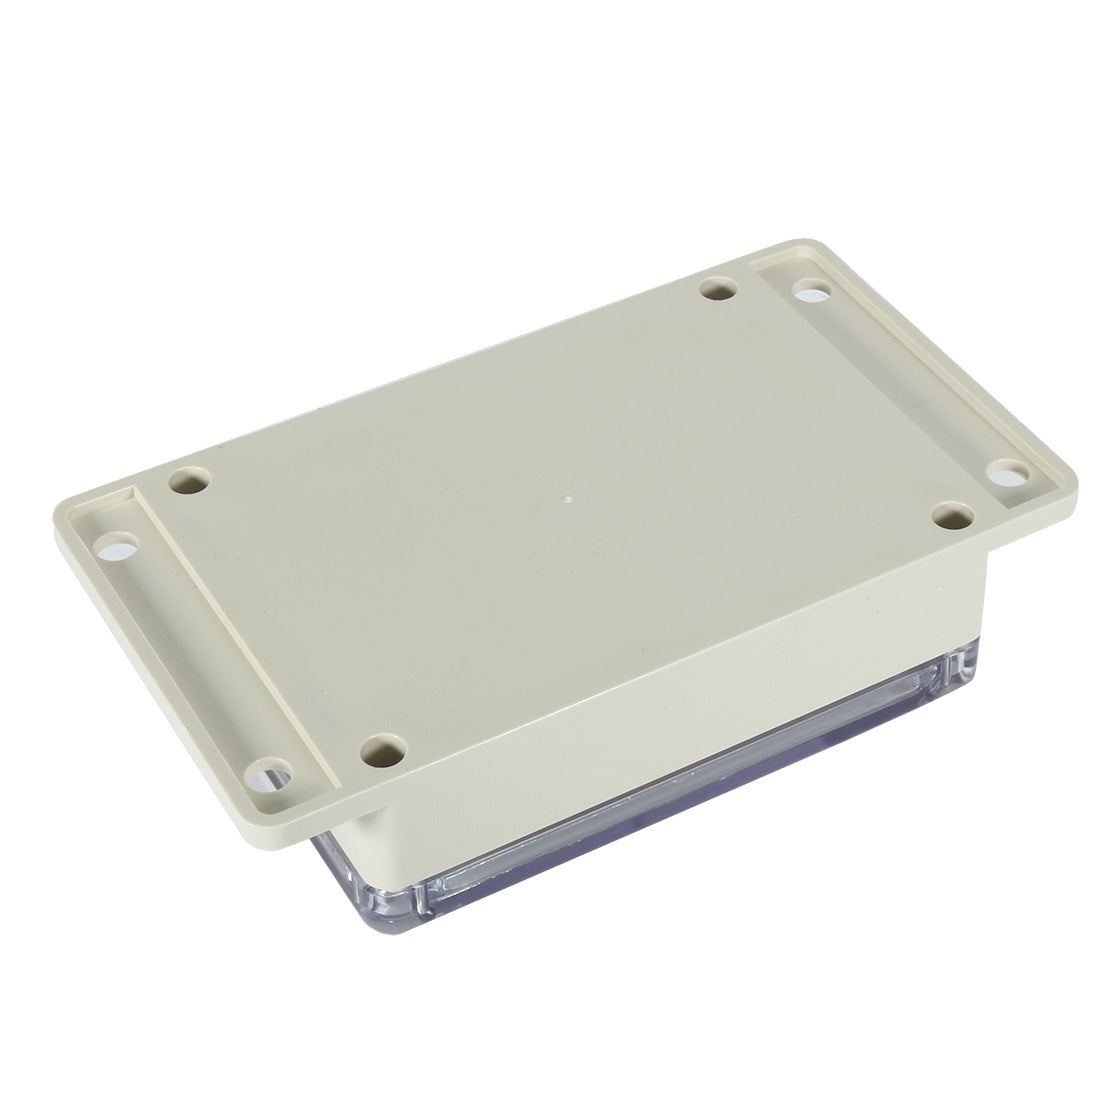 uxcell Uxcell 4.5"x3.4"x1.4"(115mmx85mmx35mm) ABS Junction Box Universal Project Enclosure w PC Transparent Cover